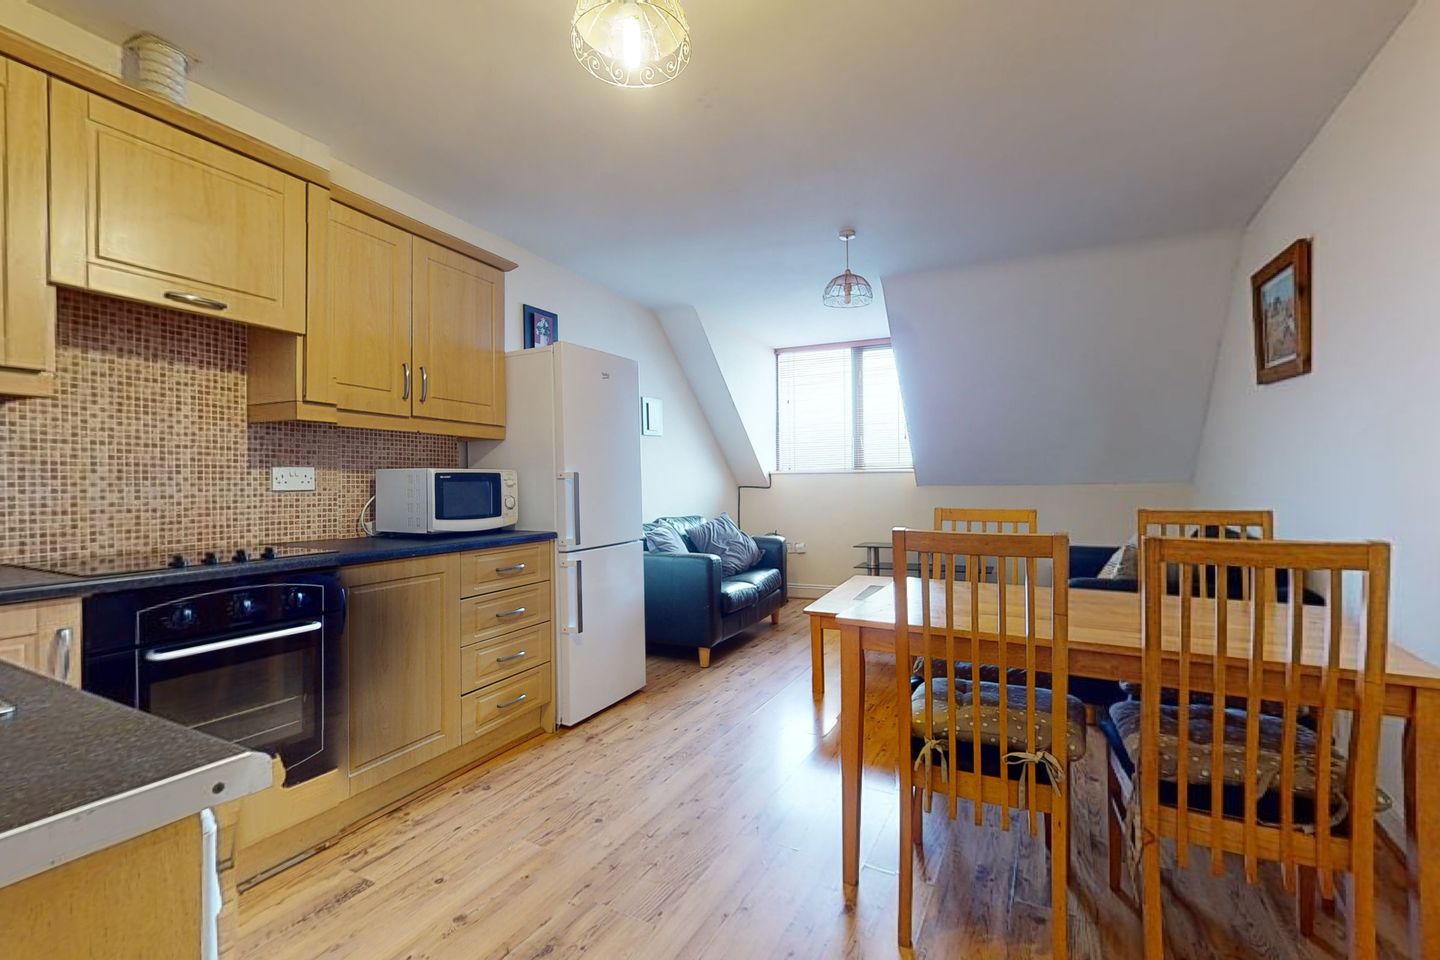 Apartment 24, Johns Bridge, Waterford City, Co. Waterford